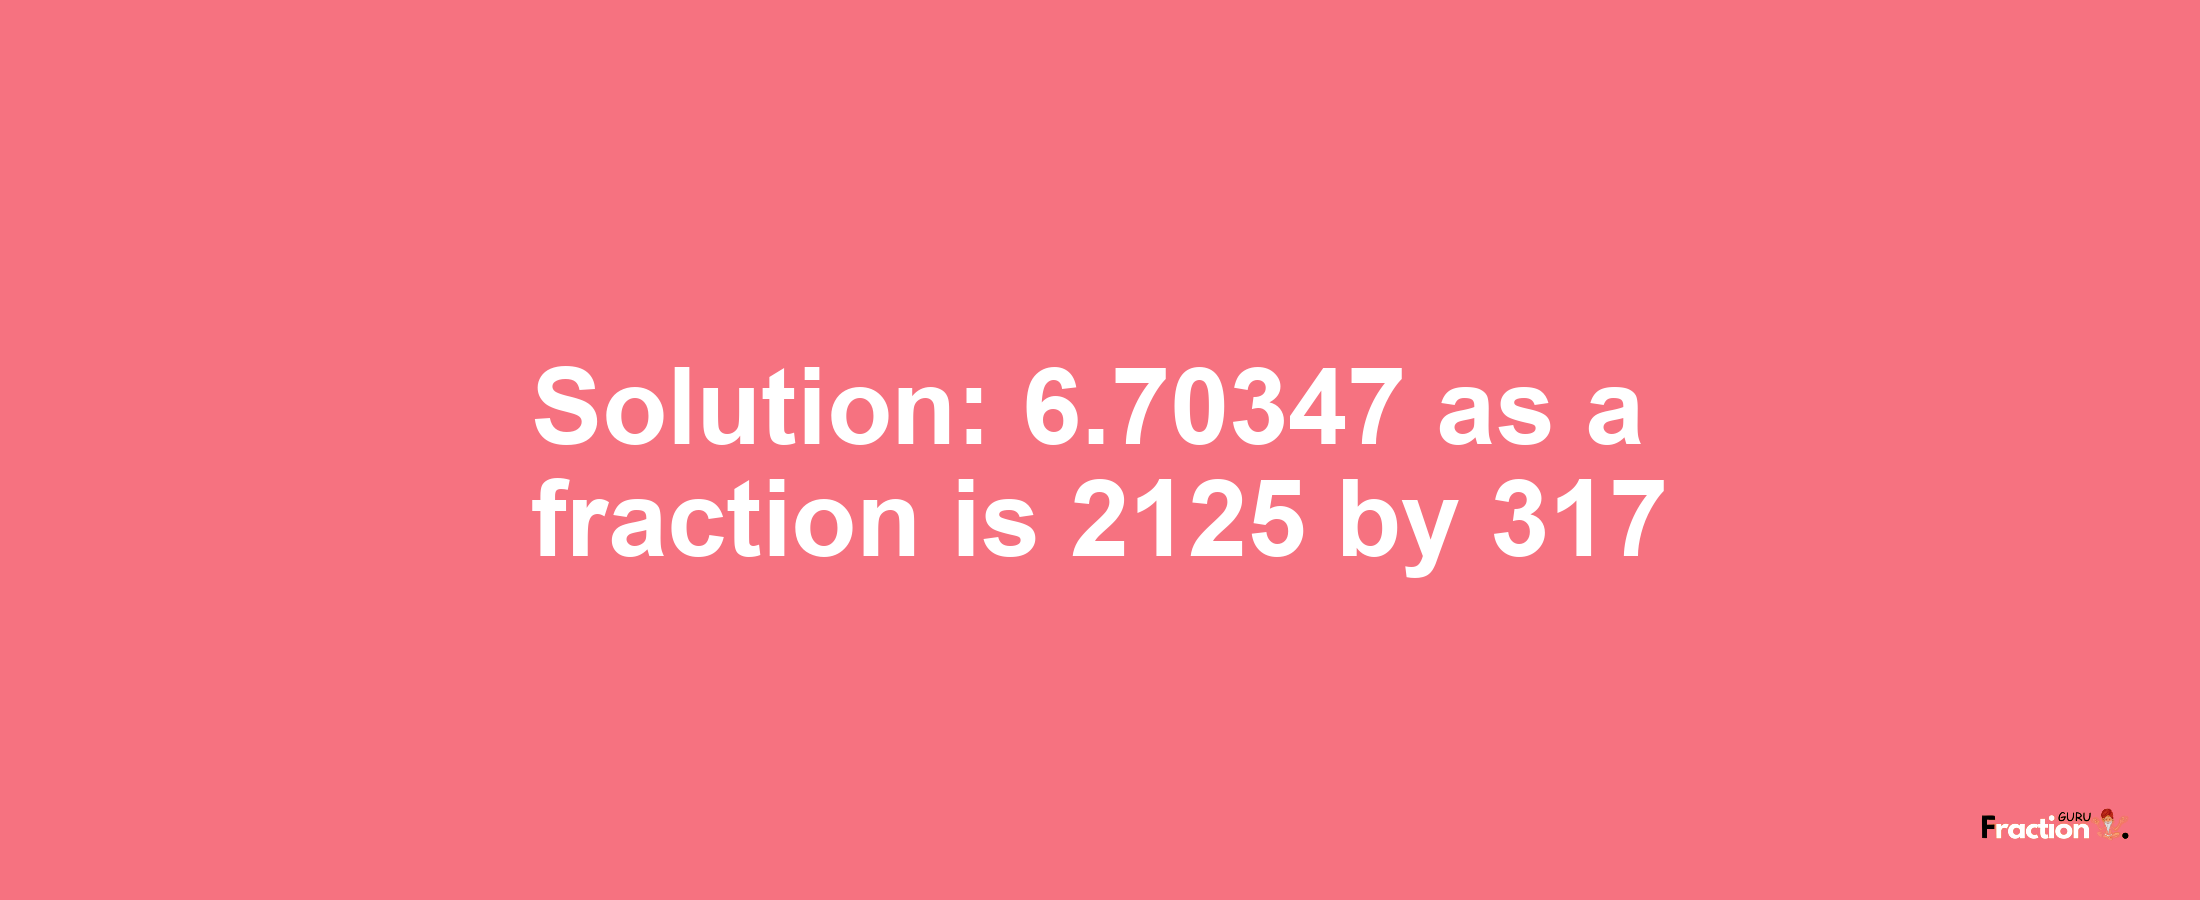 Solution:6.70347 as a fraction is 2125/317